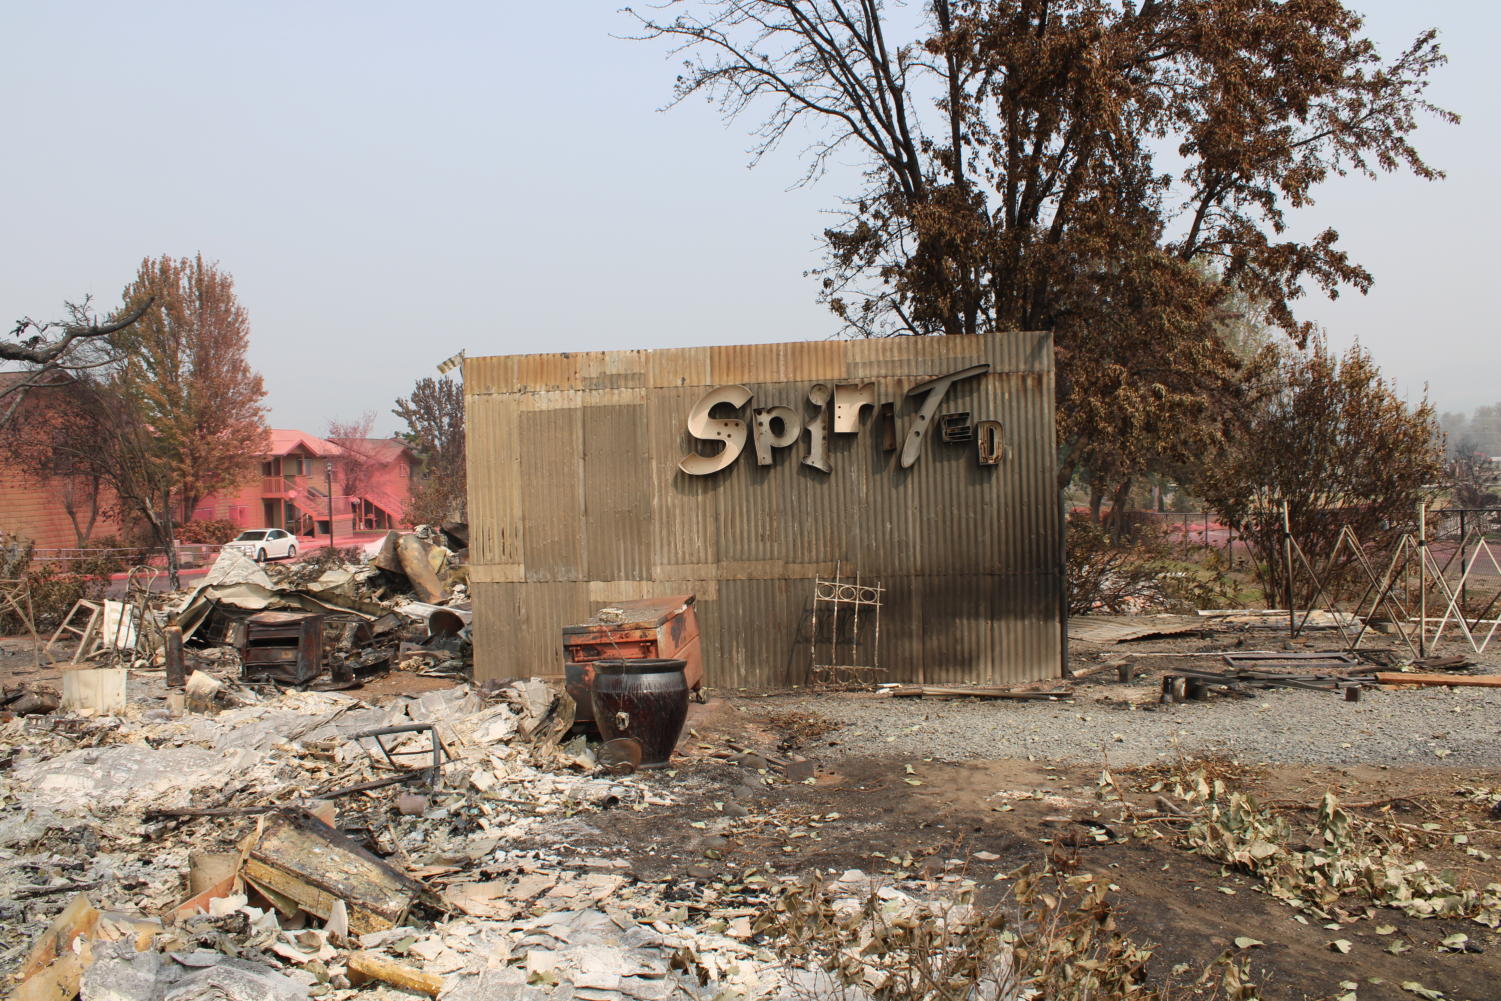 The word Spirited persists on the side of a metal shed in the midst of the Almeda fire devastation.